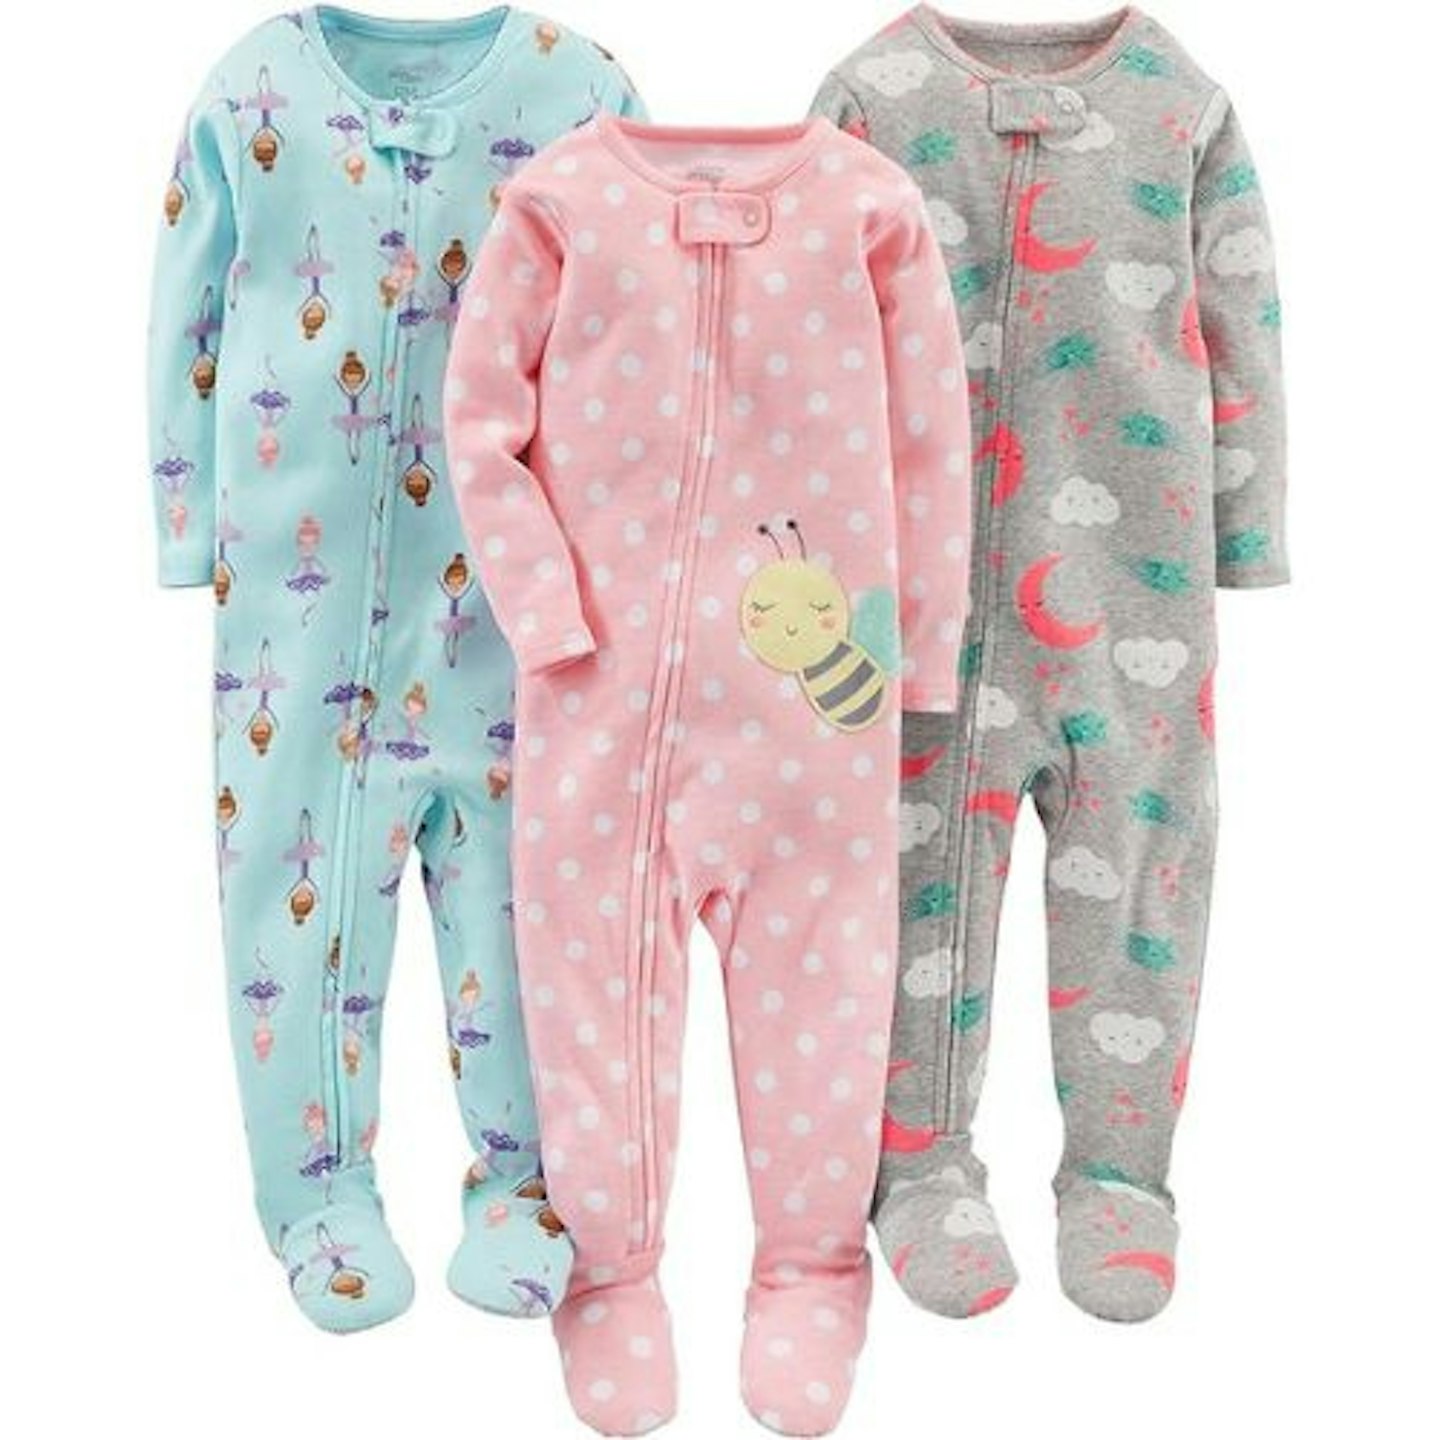 Best toddler pyjamas Toddlers and Baby Girls' Snug-Fit Footed Cotton Pyjamas